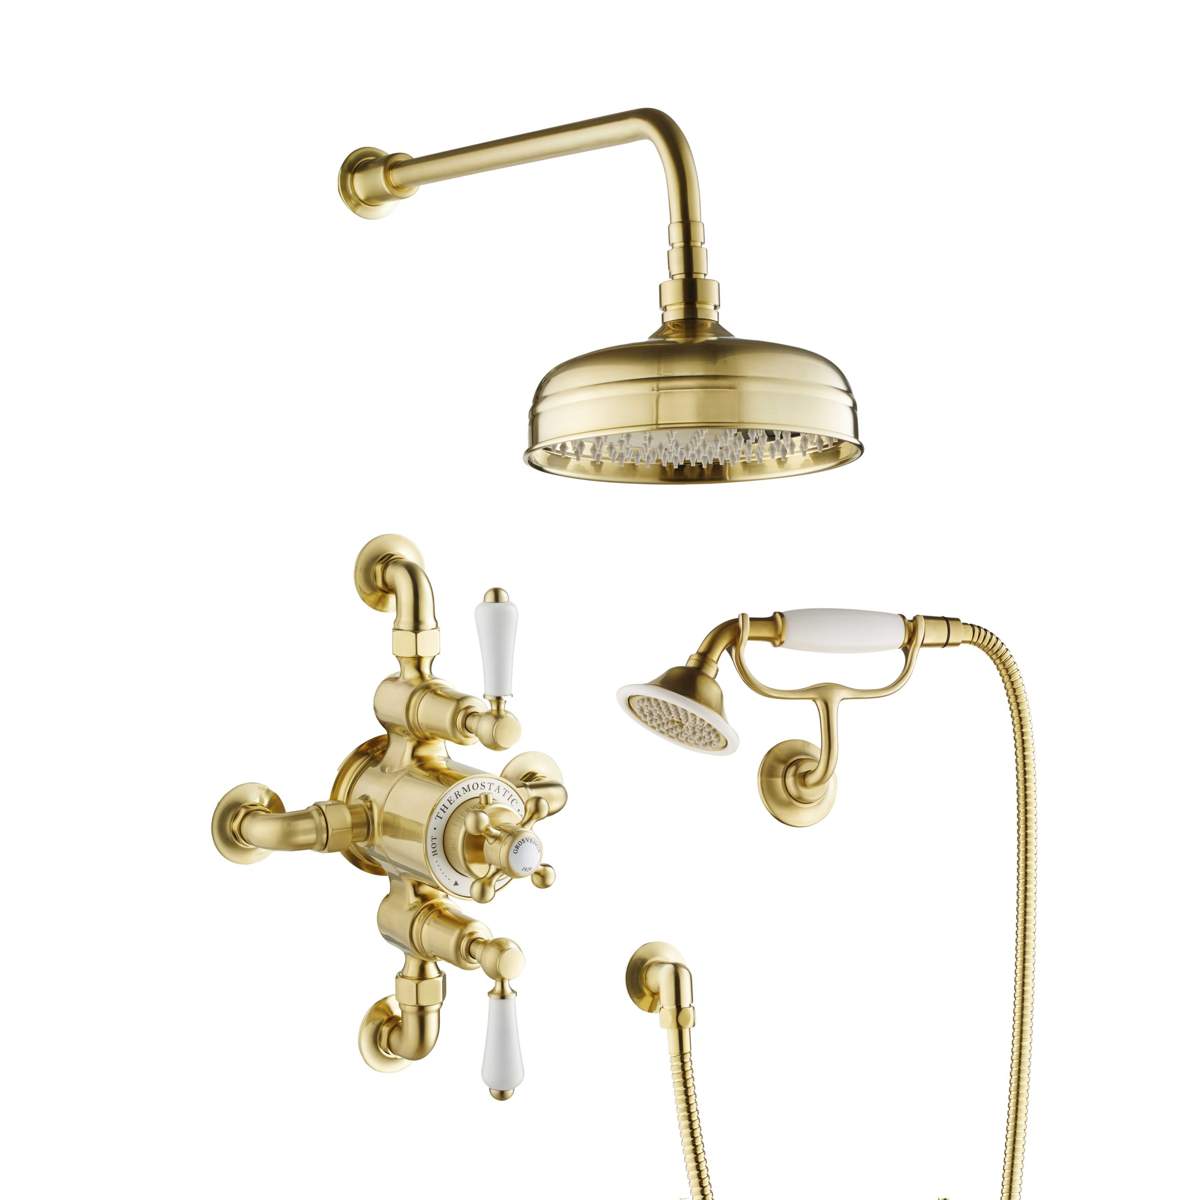 JTP Grosvenor Cross Brushed Brass Exposed Thermostatic Valve with 2 Outlet (GRO281BBR)